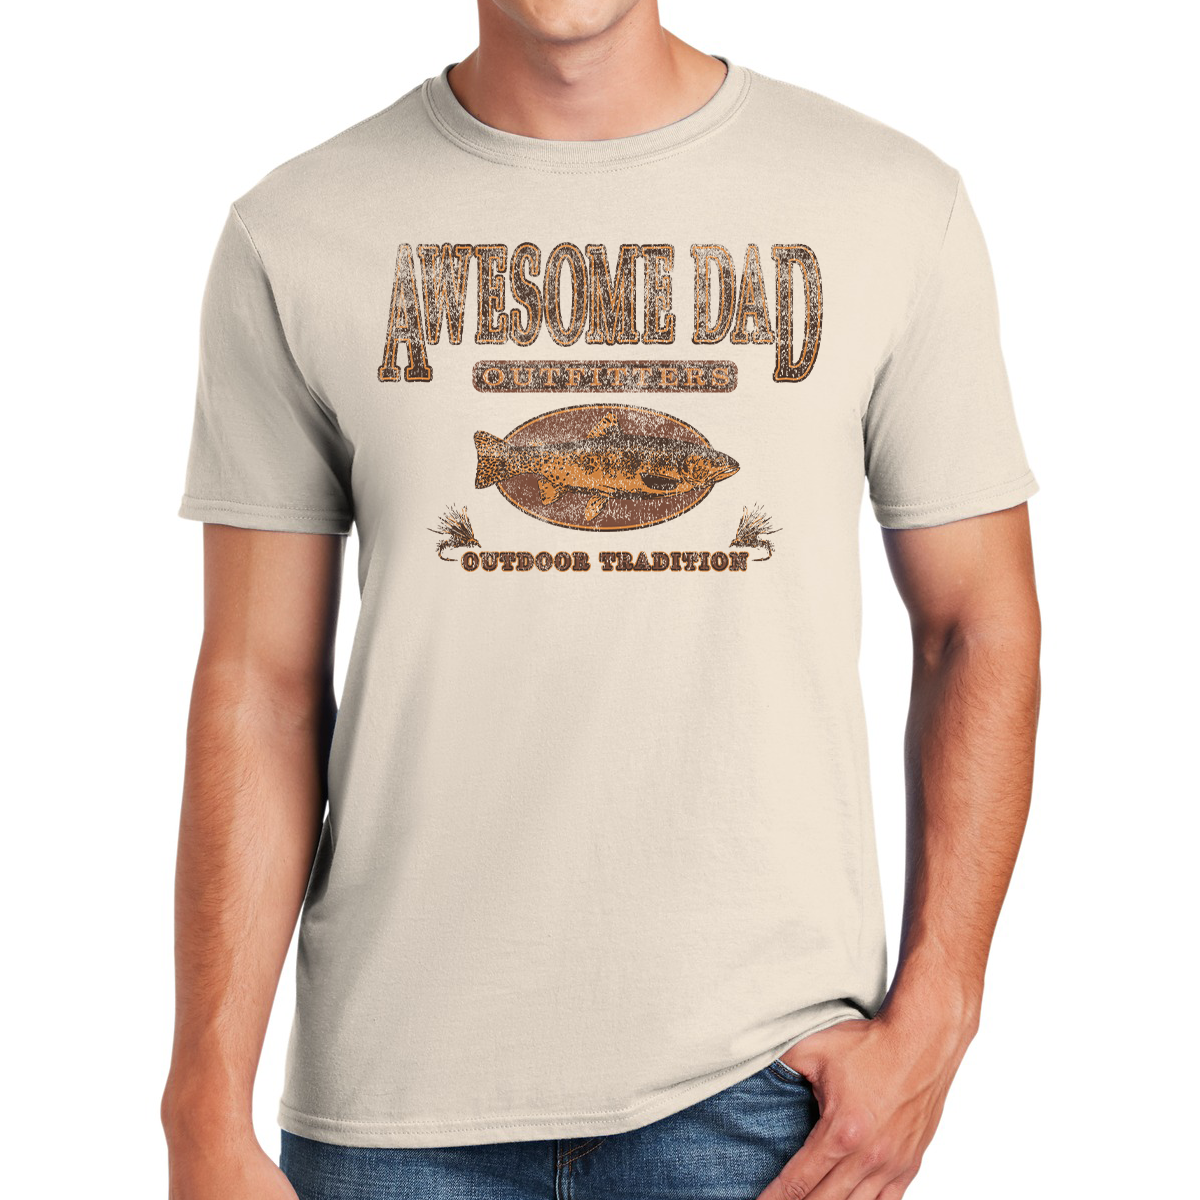 Awesome Dad Outfitters Tradition Fly Fishing Outdoor Tradition Nature T-shirt